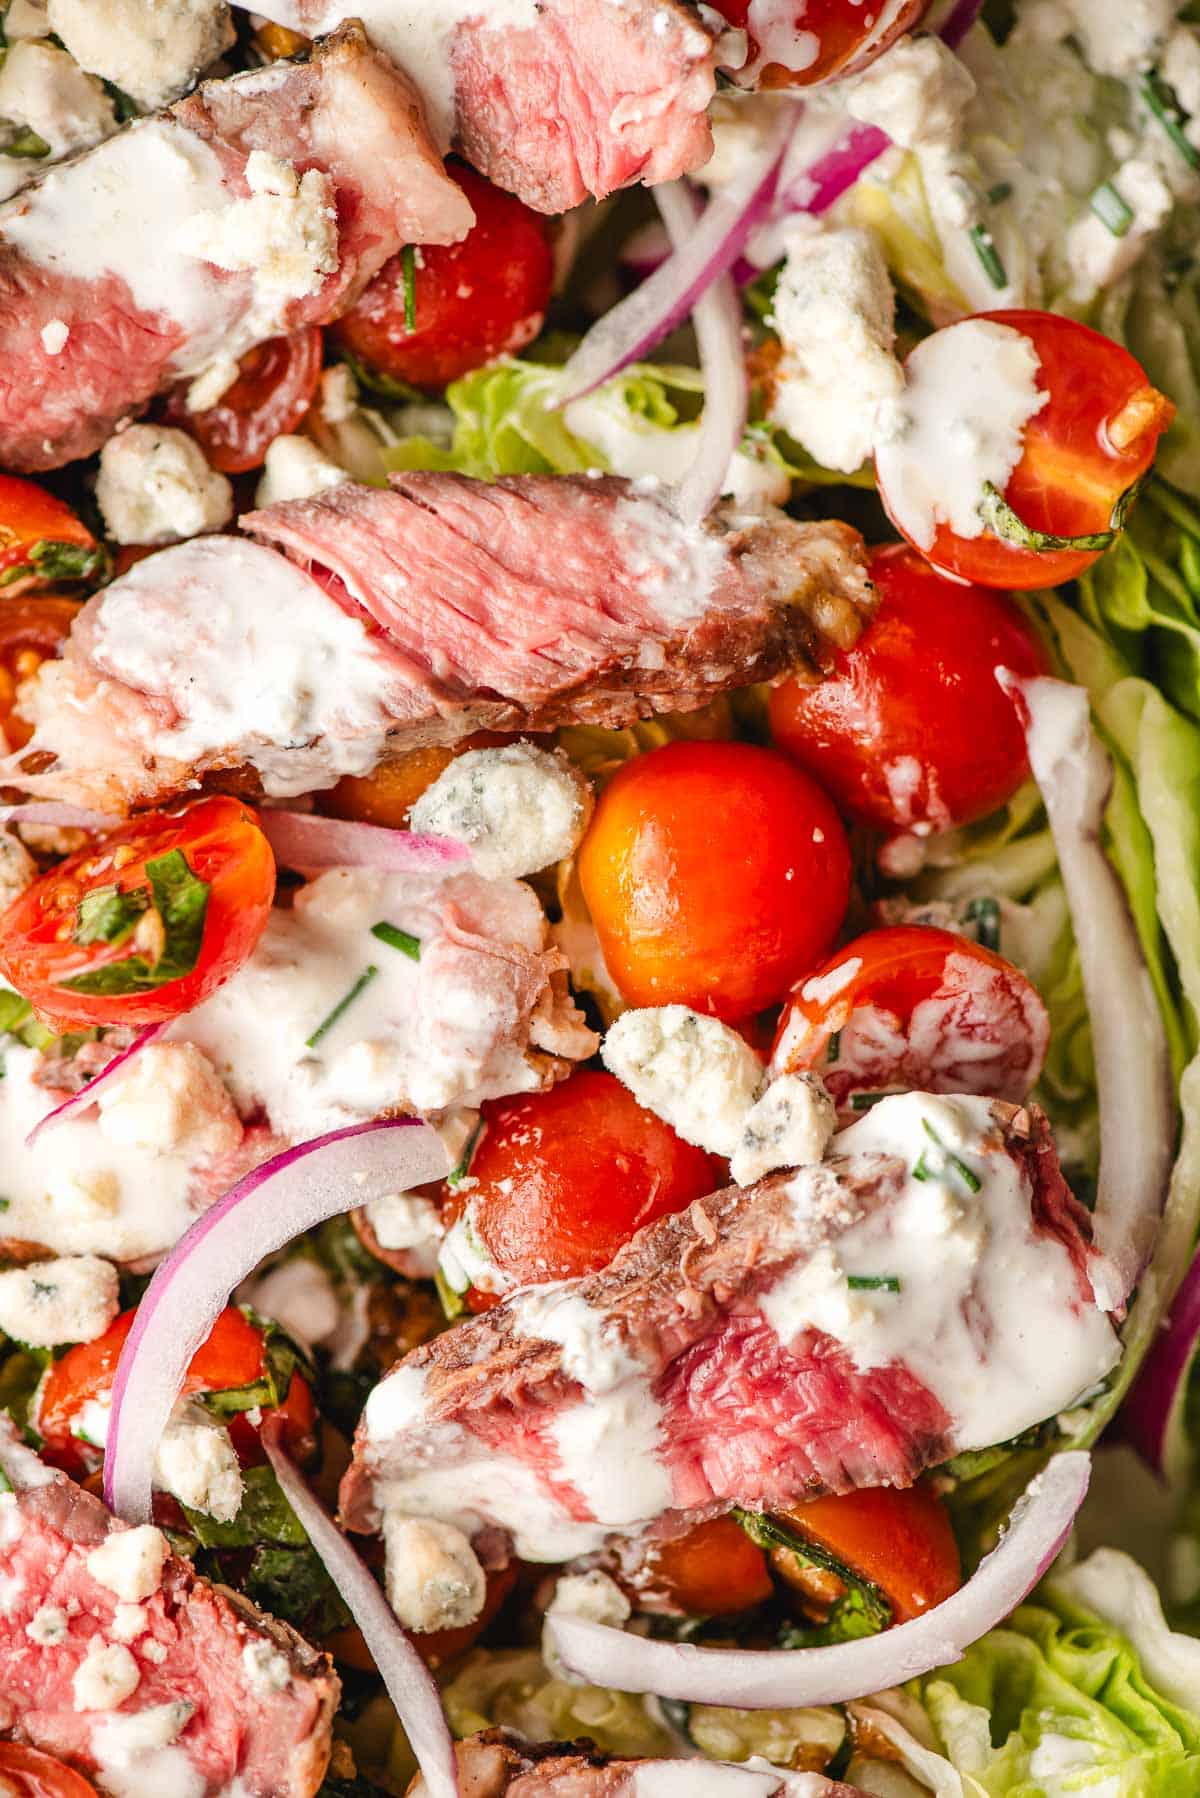 Wedge salad with grilled steak, blue cheese dressing, and bruschetta tomatoes.